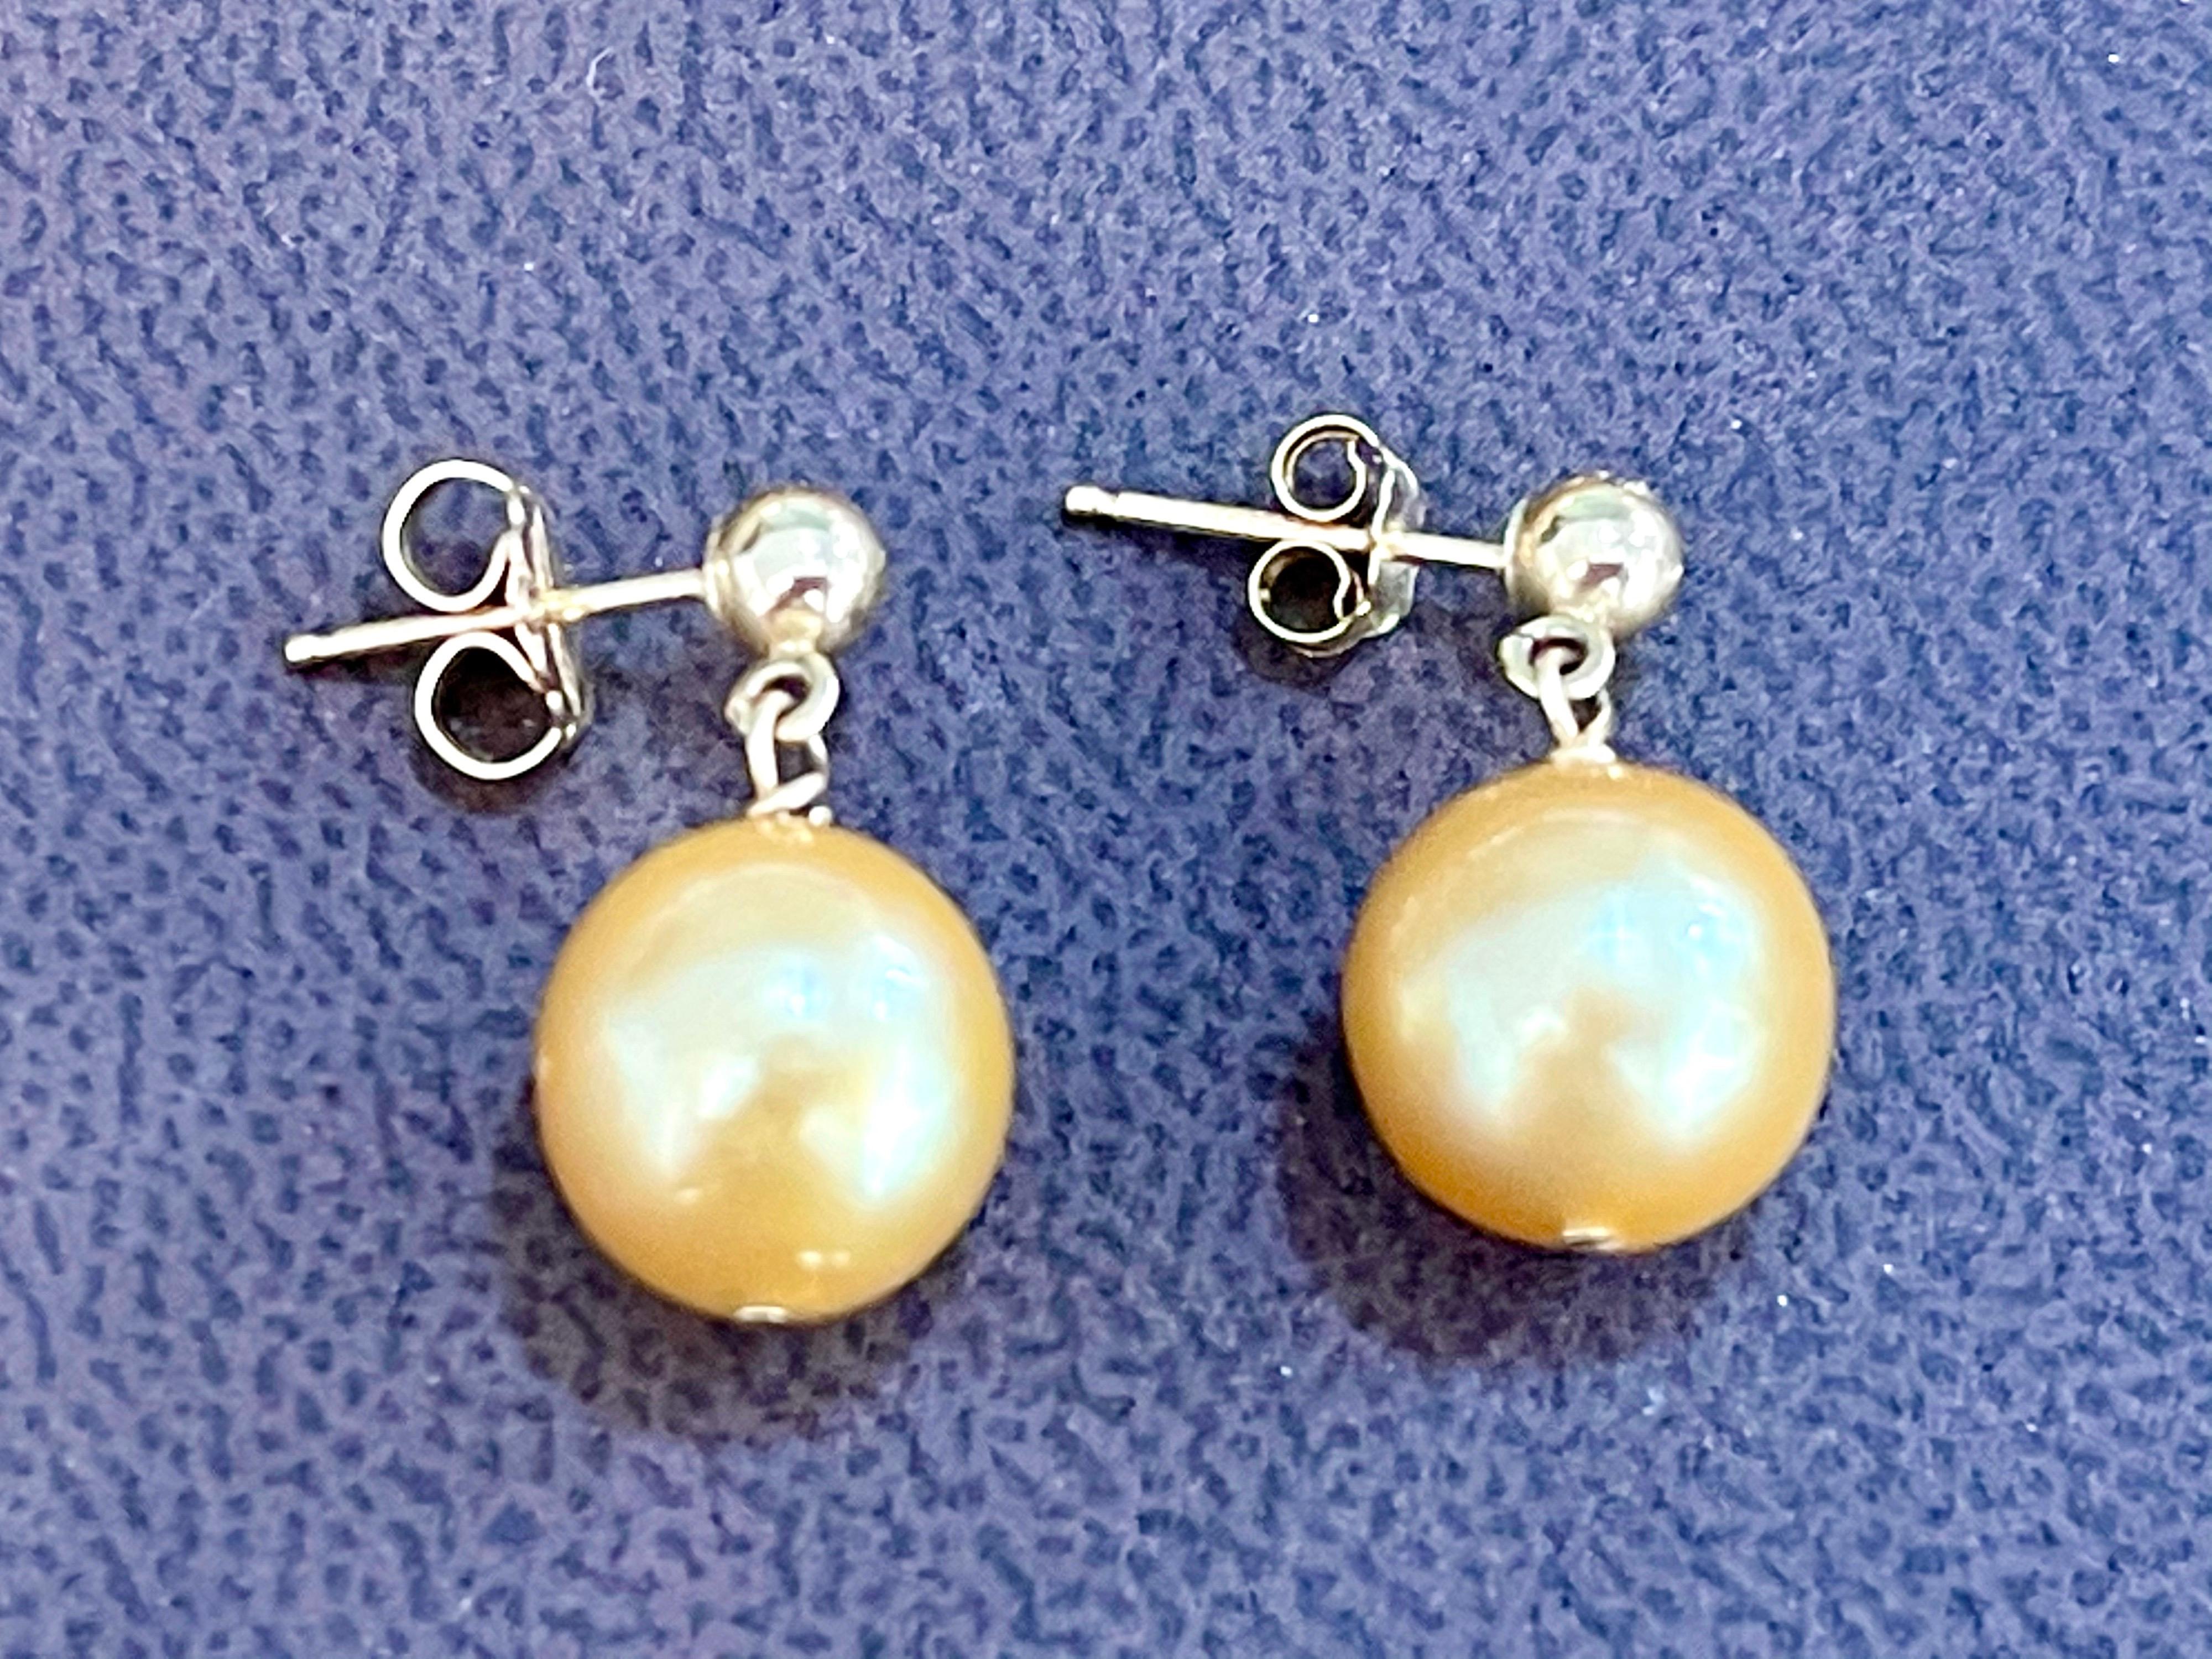 
10 MM Golden South Sea  Pearl Dangling Earrings 14 Karat Yellow Gold
All pearls are absolutely clean with no blemishes .Approximately 10 mm 
small gold stud at the top of the earring which sits on ear lobe and pearl dangle from it.
it is a post